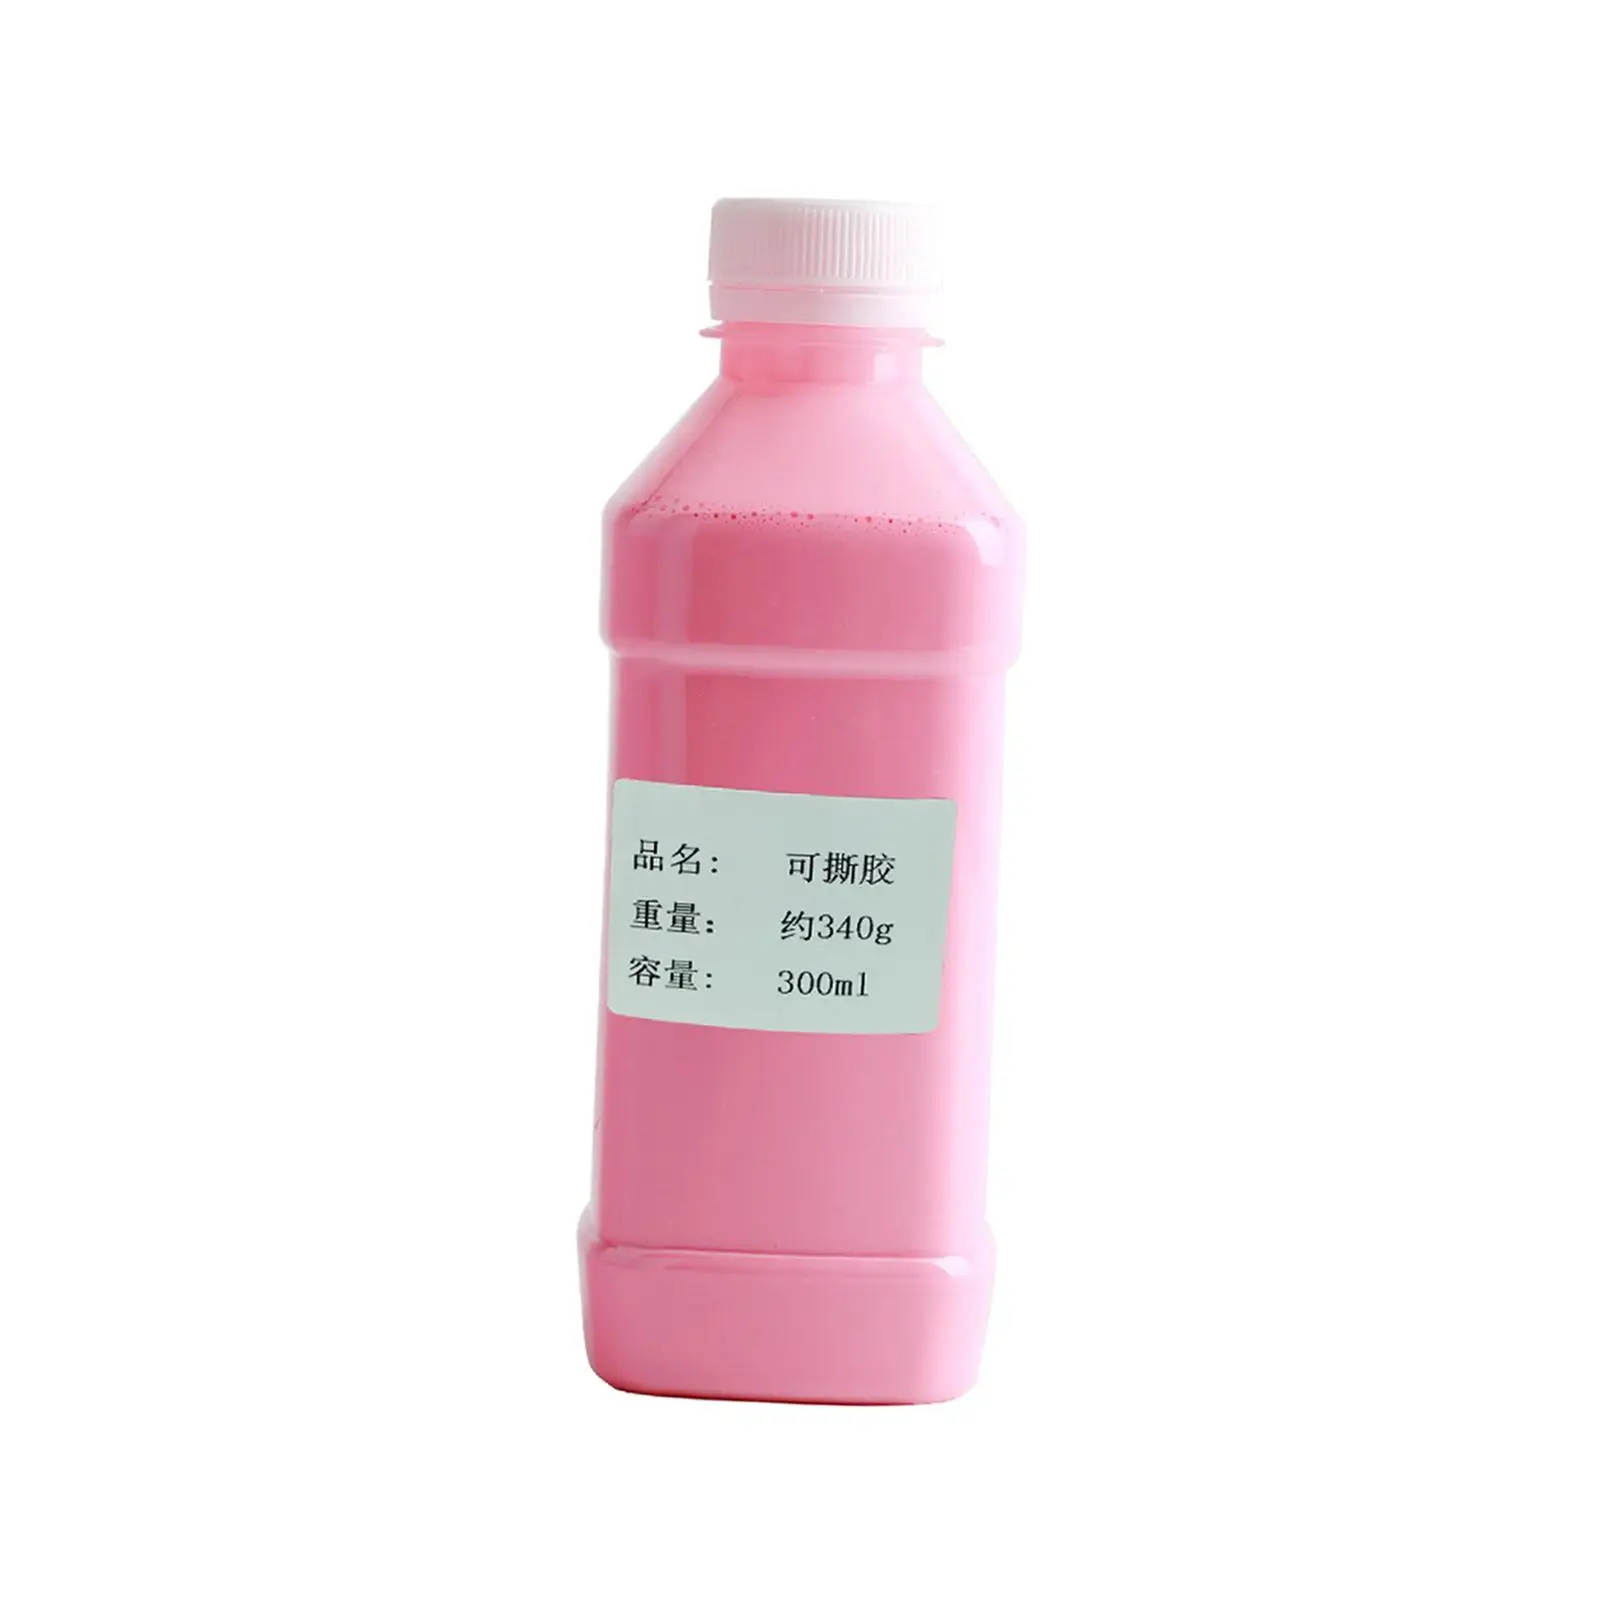 Pottery Masking Glue Can Tear Off Glue Quick Drying 300ml Glue Peelable Glue Tearable Glue for Crafting Art Projects Watercolor